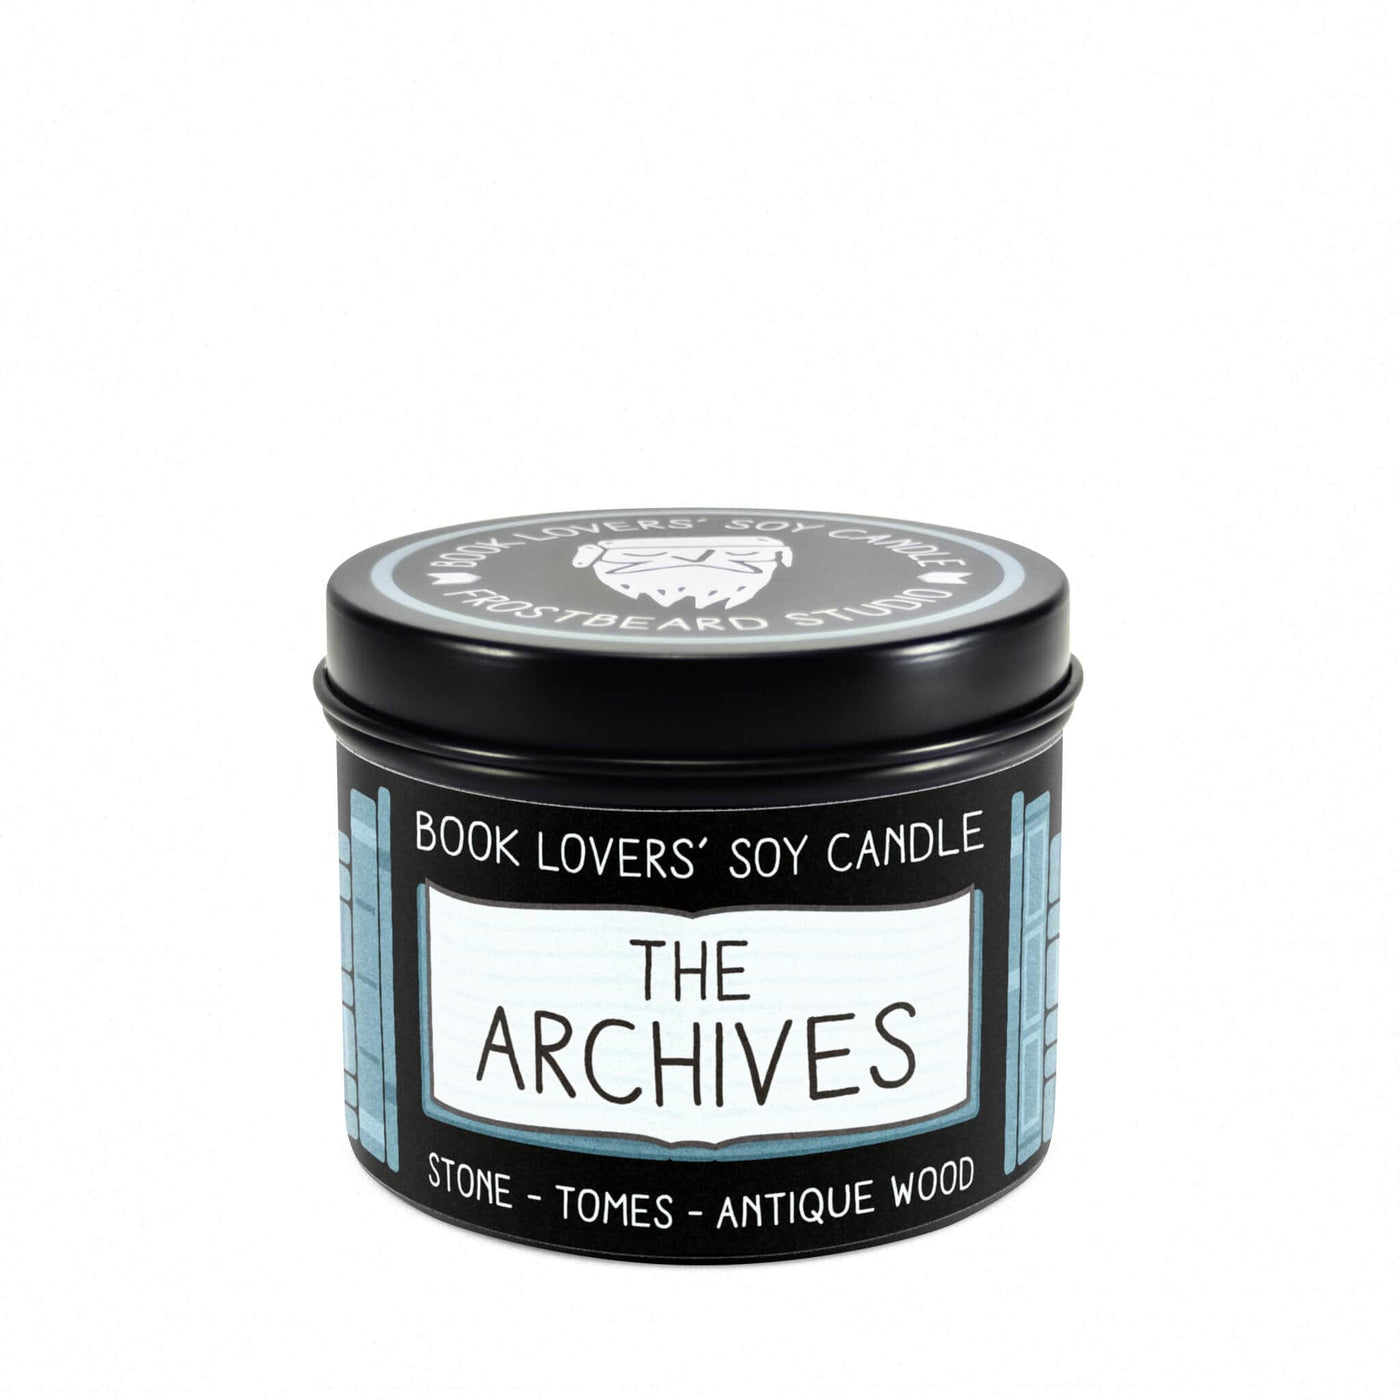 The Archives  -  4 oz Tin  -  Book Lovers' Soy Candle  -  Frostbeard Studio